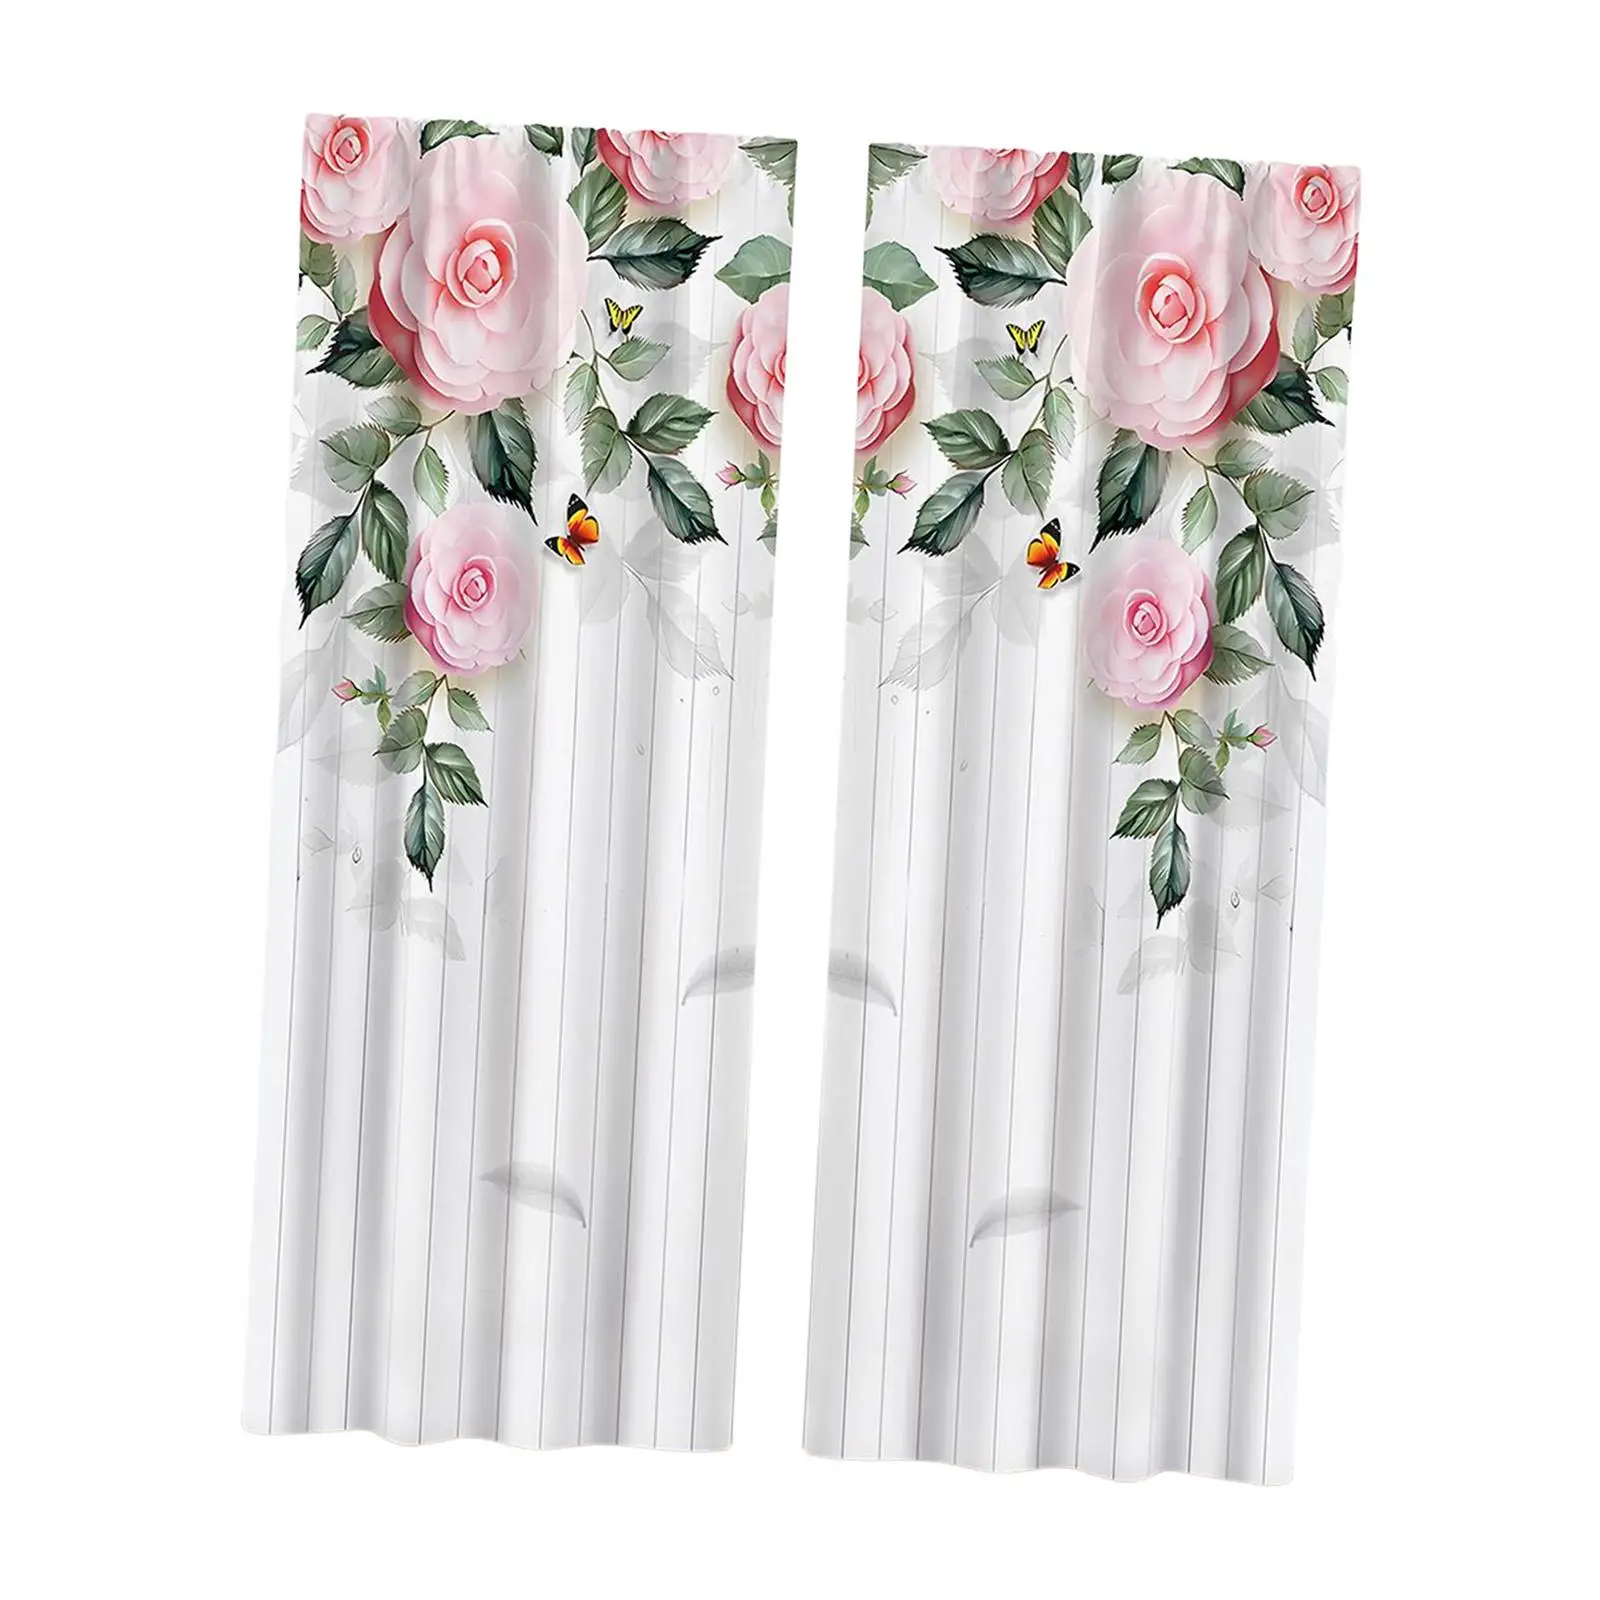 

Rose Print Curtains Drapes Decorative Multifunctional Accessory Polyester Easily Install with Grommets for Living Room